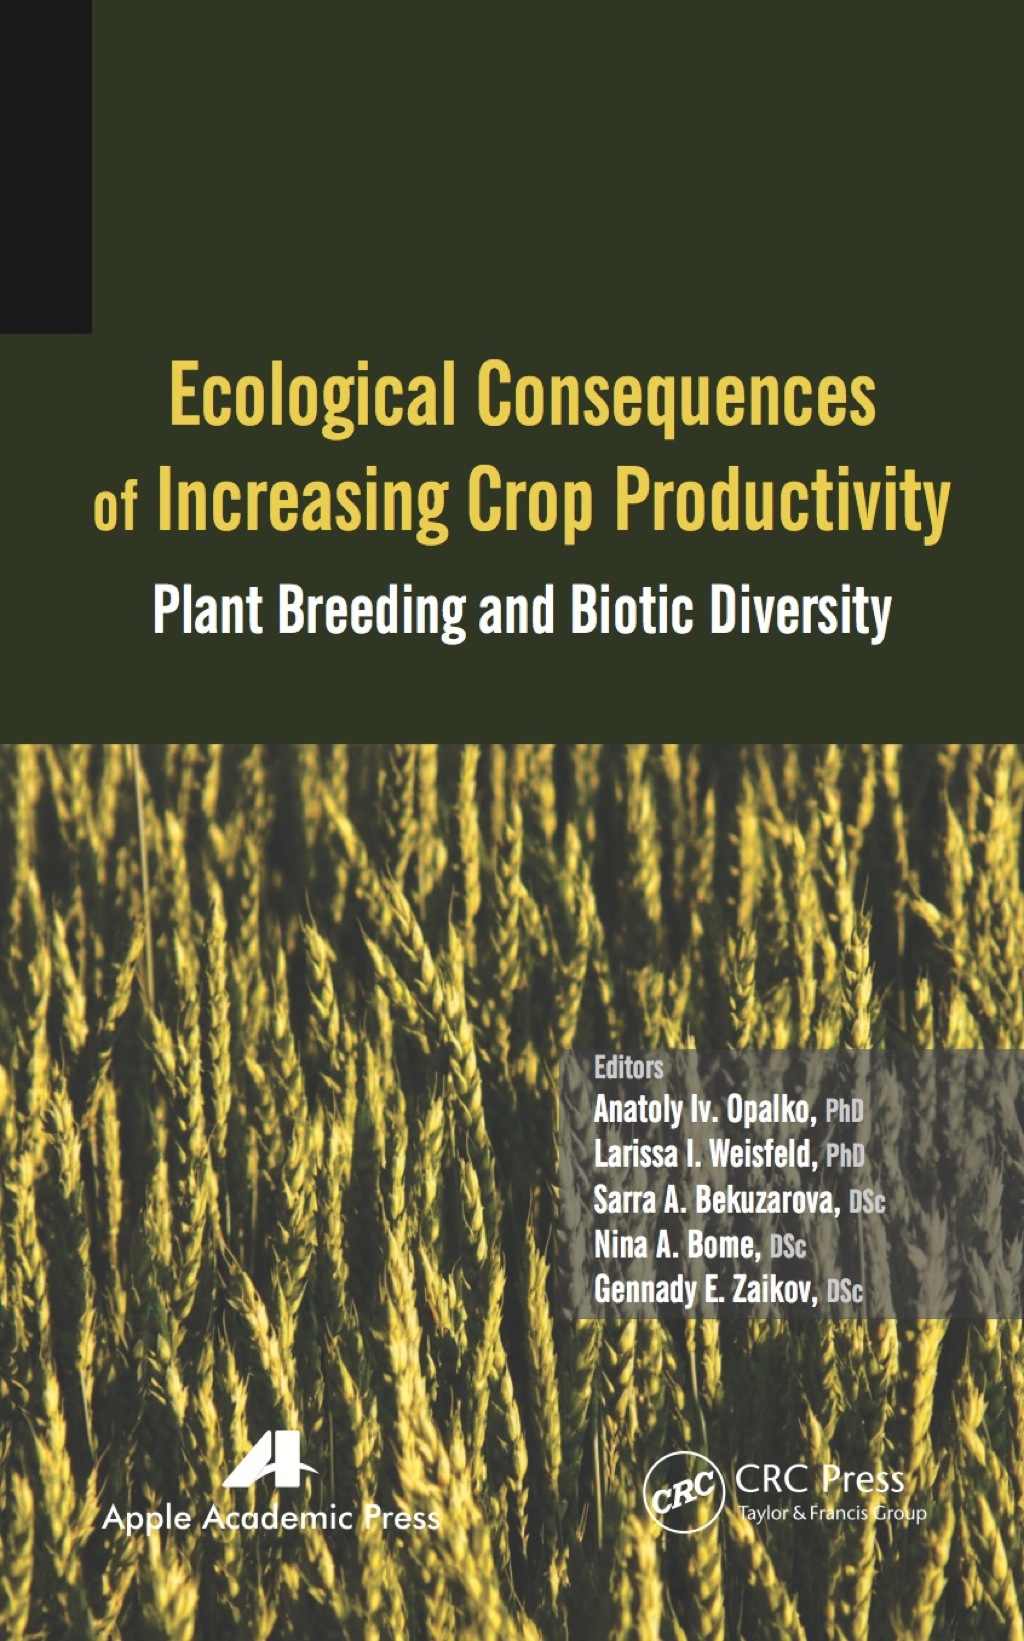 Ecological Consequences of Increasing Crop Productivity (eBook) - Anatoly I. Opalko